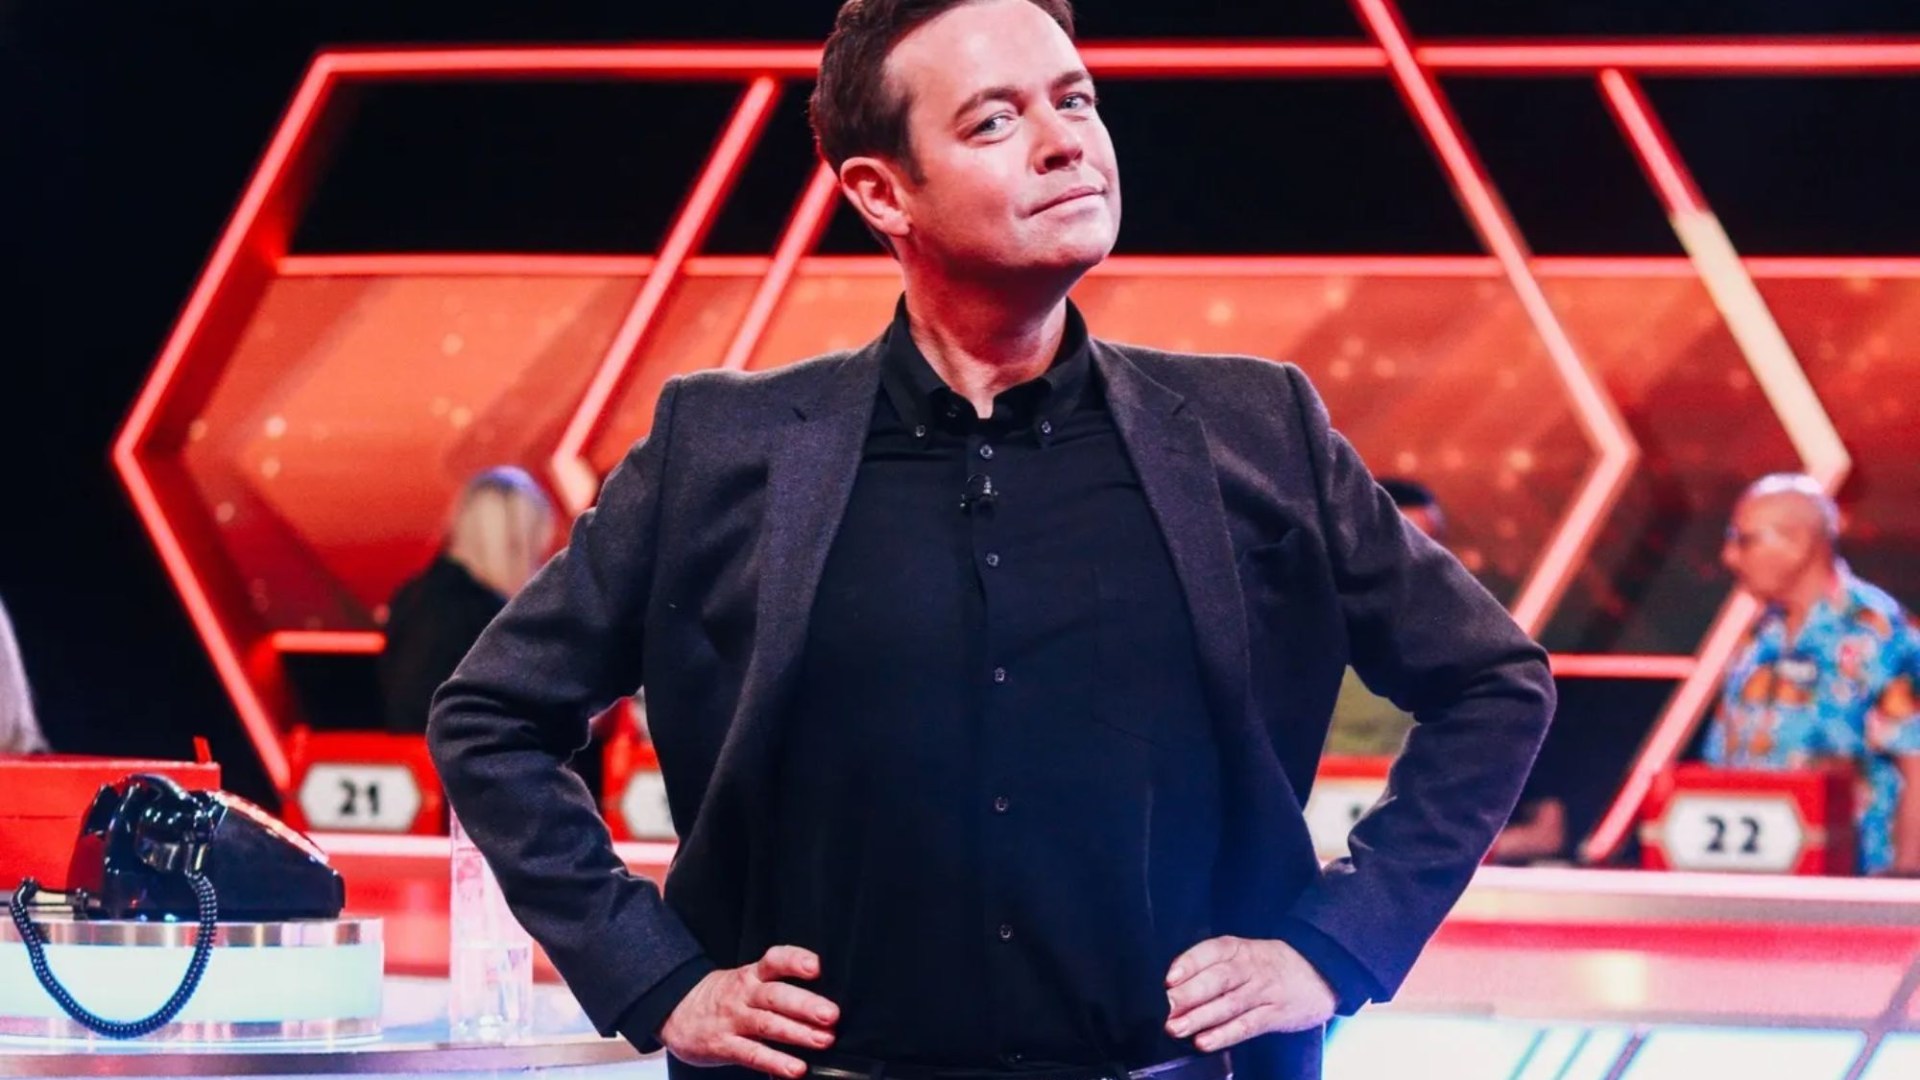 Uncover the Romantic Mystery: Did Presenter Stephen Mulhern With Josie Gibson?